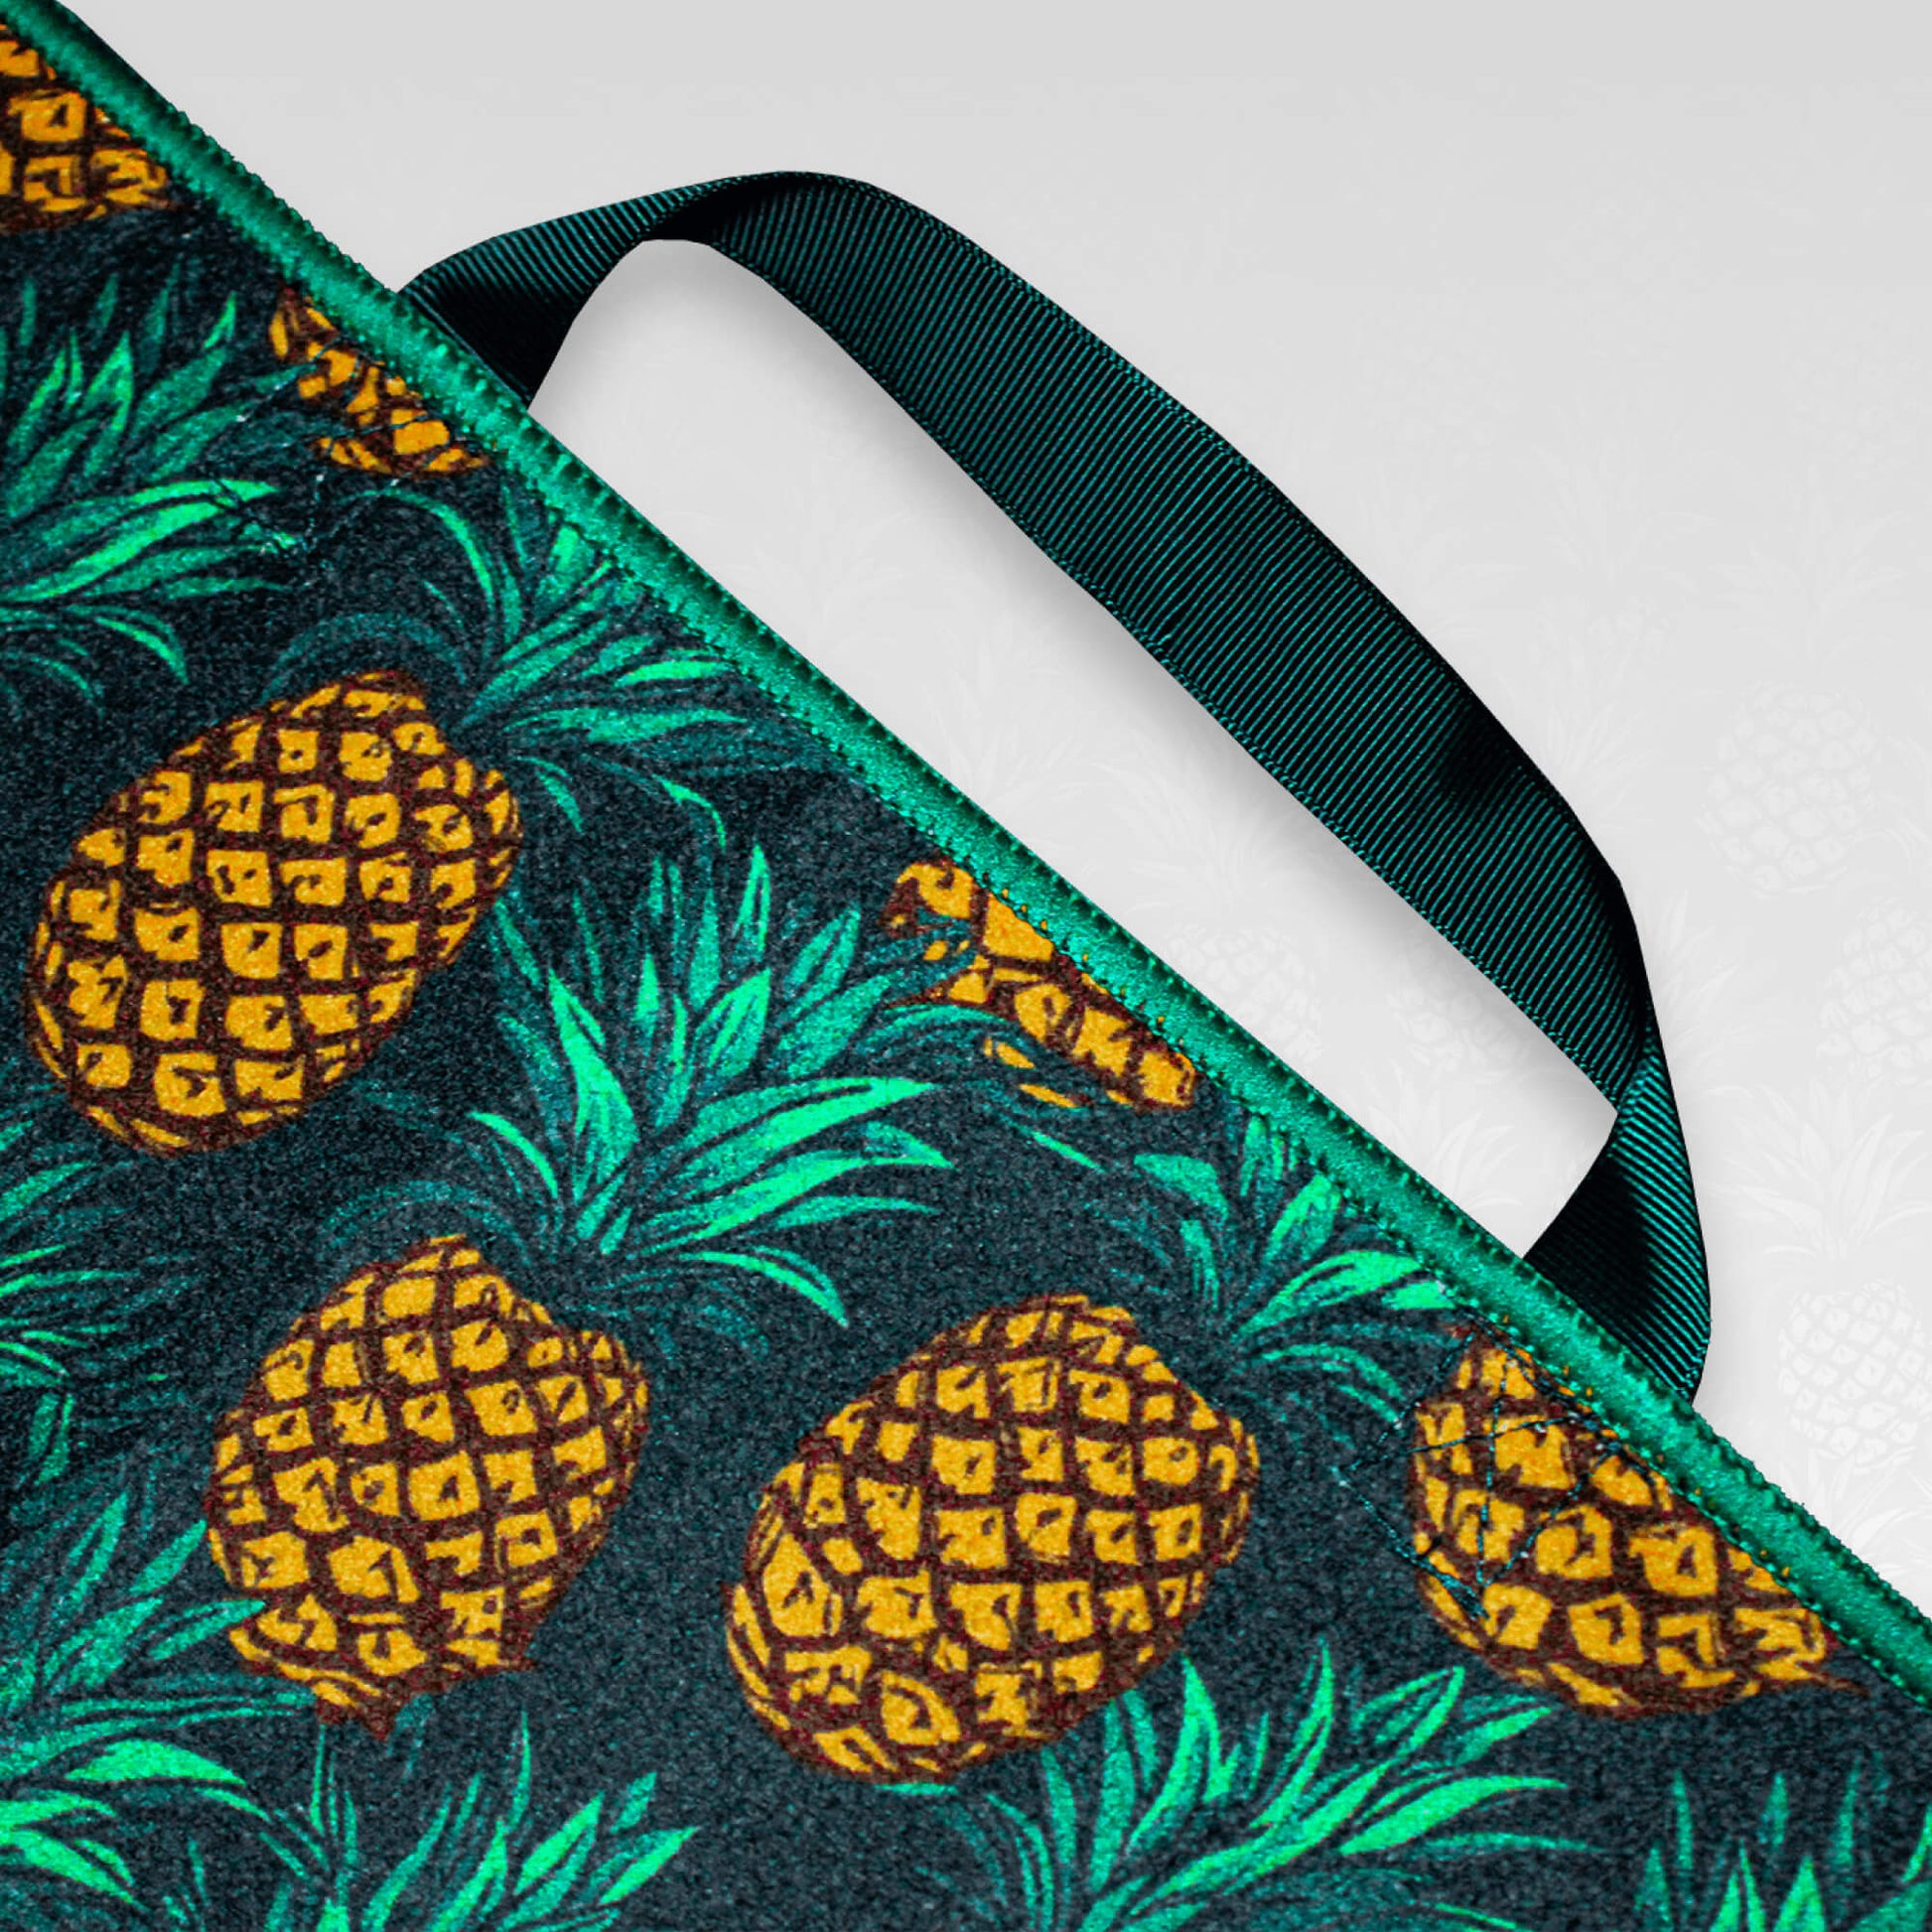 A close up of the handle of a pineapple patterned microfibre golf towel